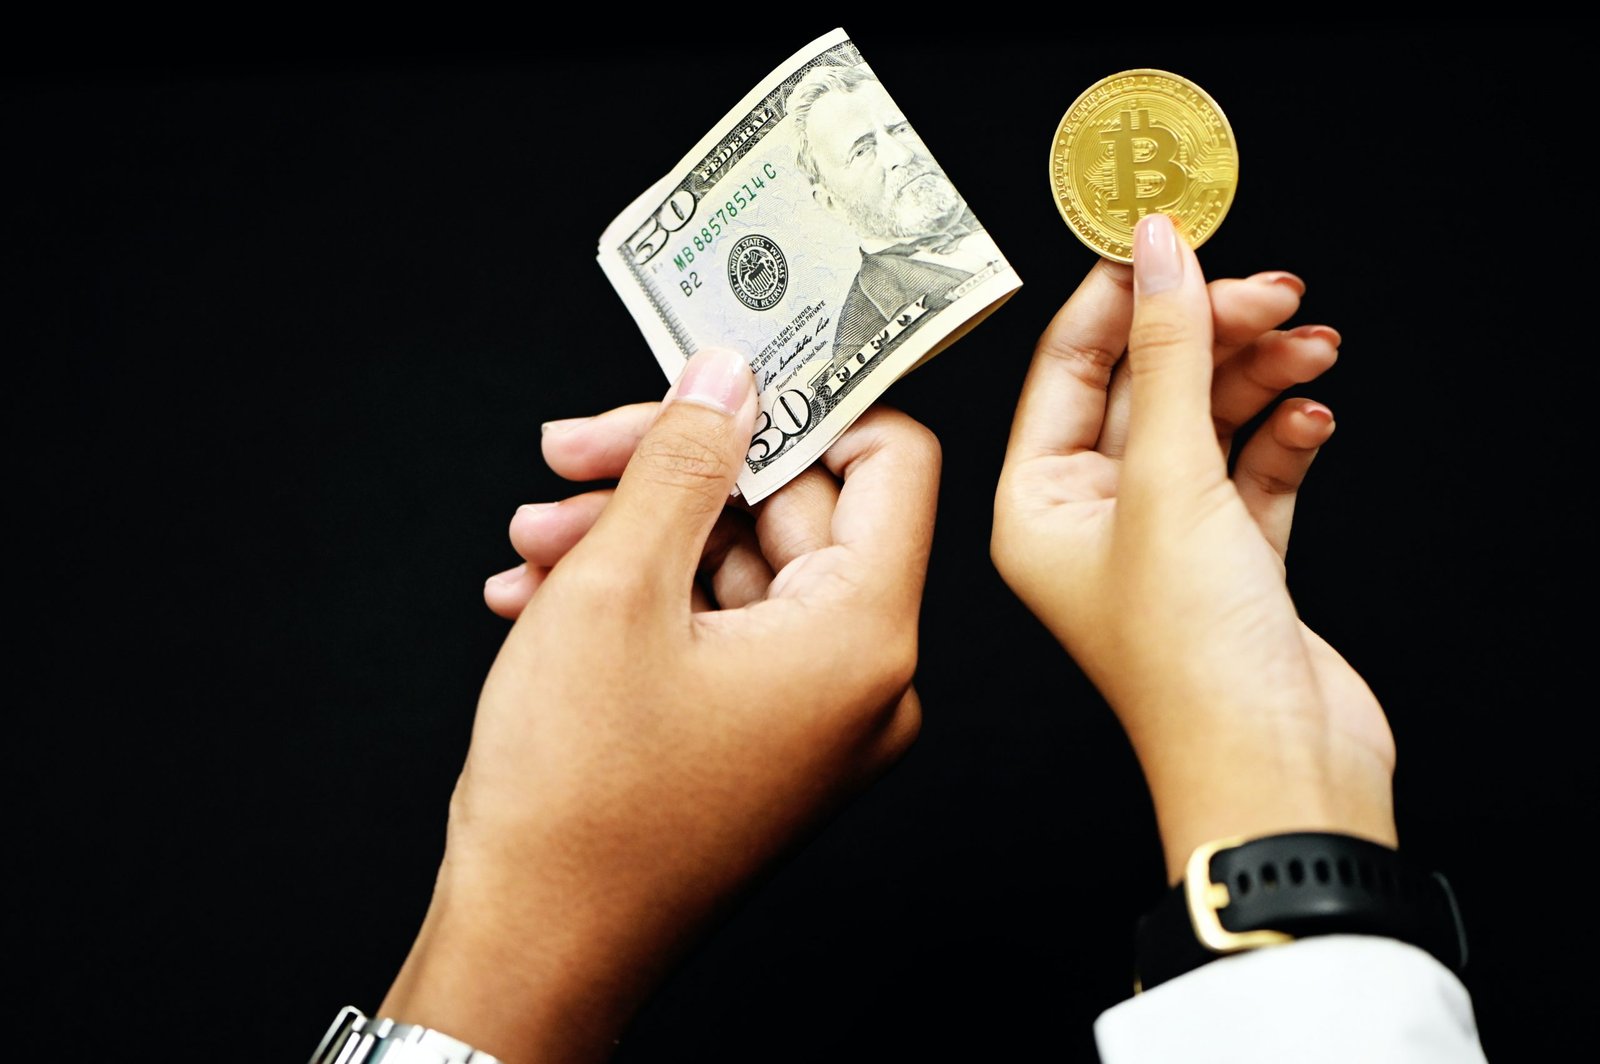 A hand holding a 50 dollar bill and a hand holdig a gold coin with the Bitcoin logo.